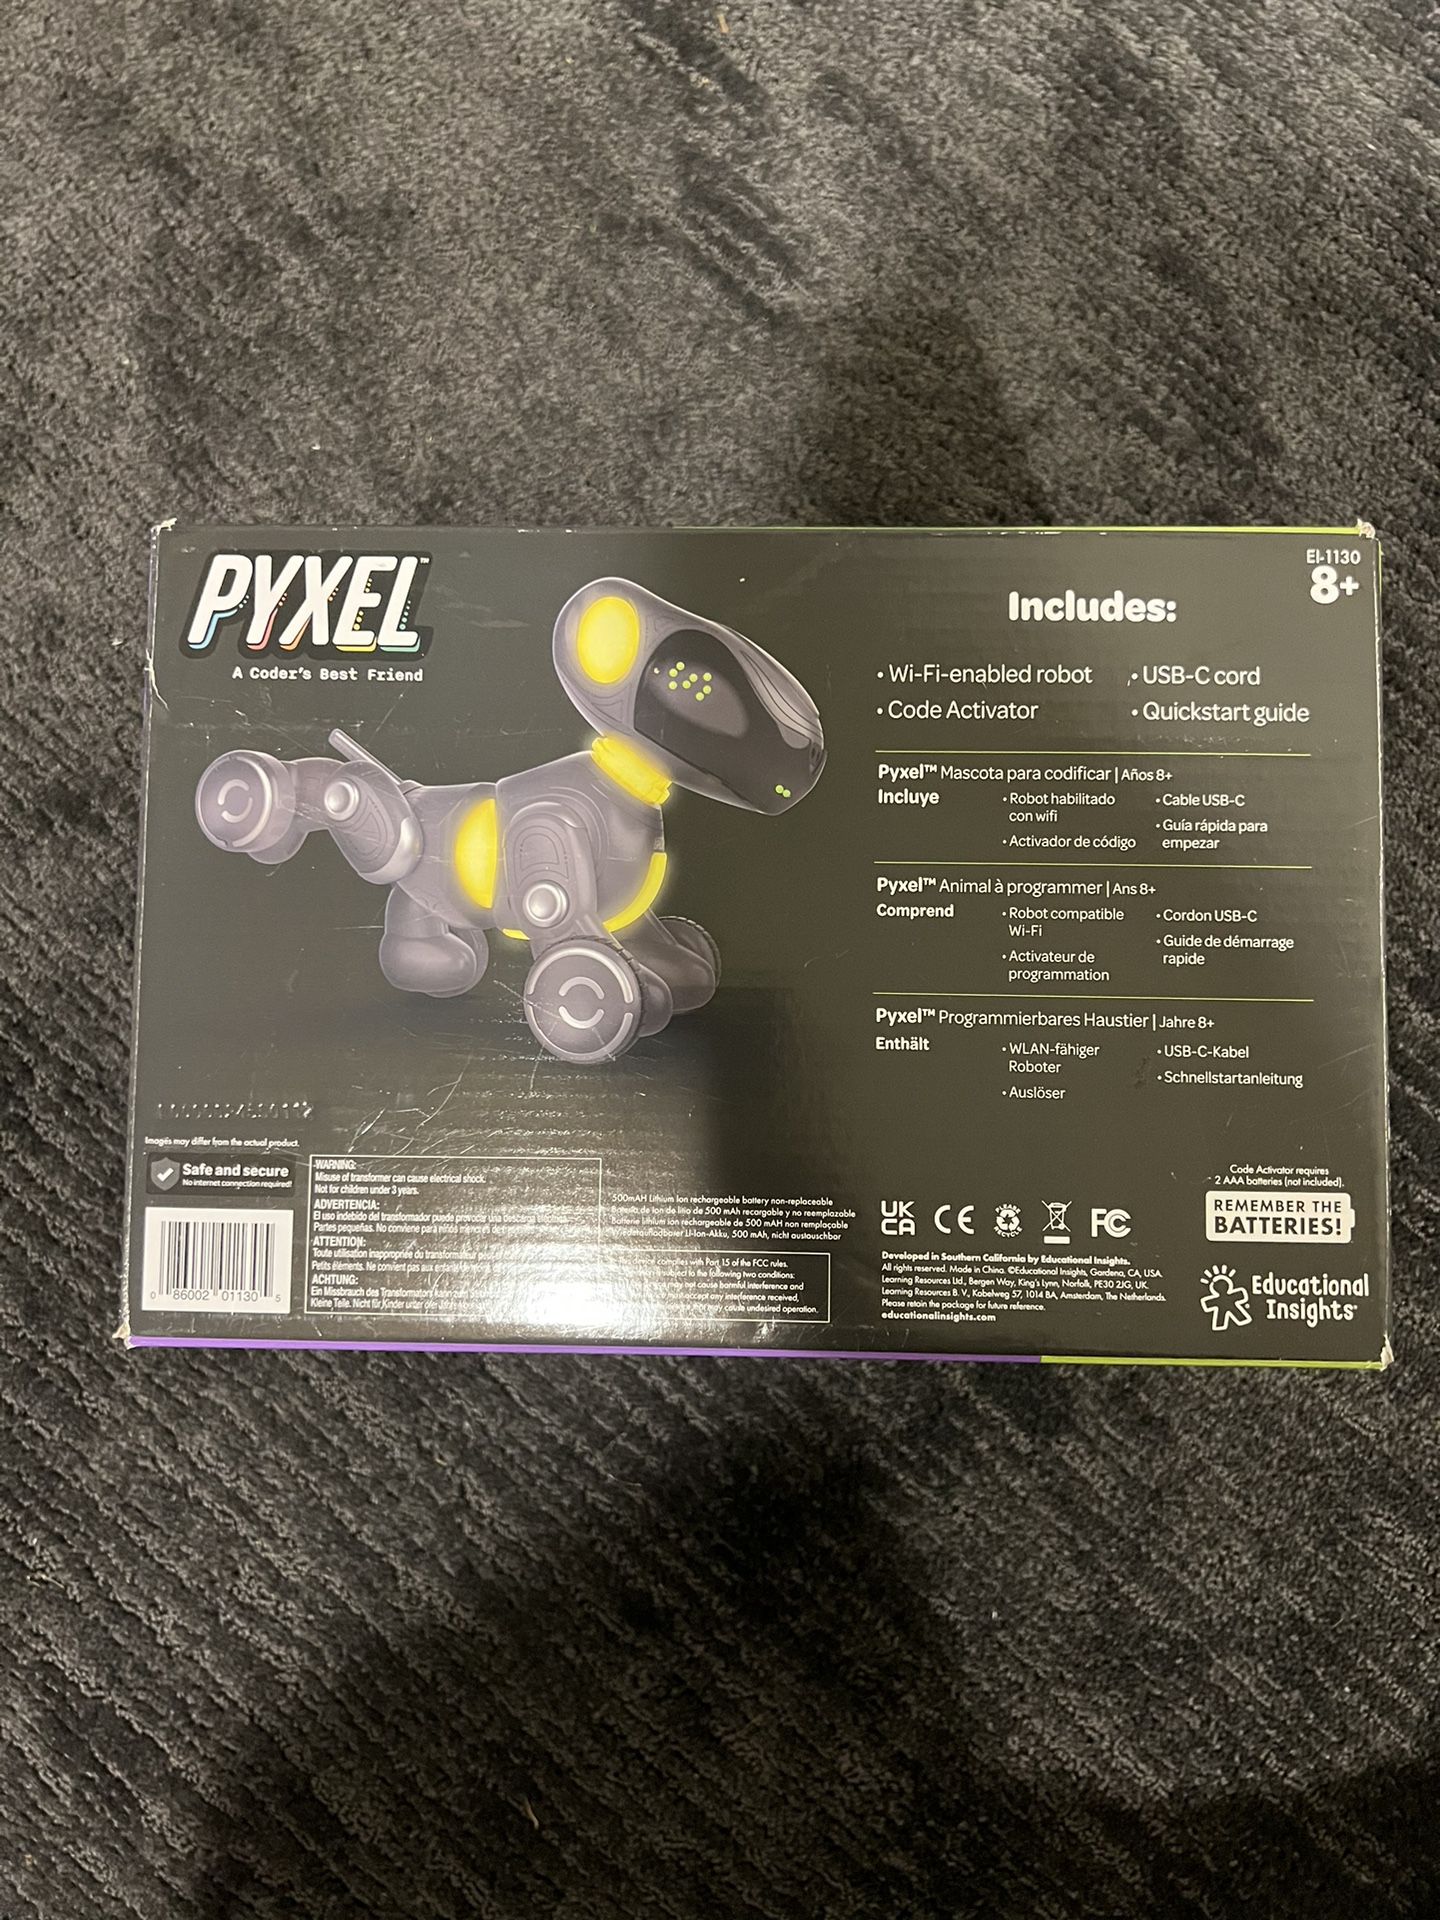  Educational Insights PYXEL A Coder's Best Friend - Coding Robots  for Kids with Blockly & Python Coding Languages, Coding for Kids Ages 8+,  STEM Toys : Toys & Games